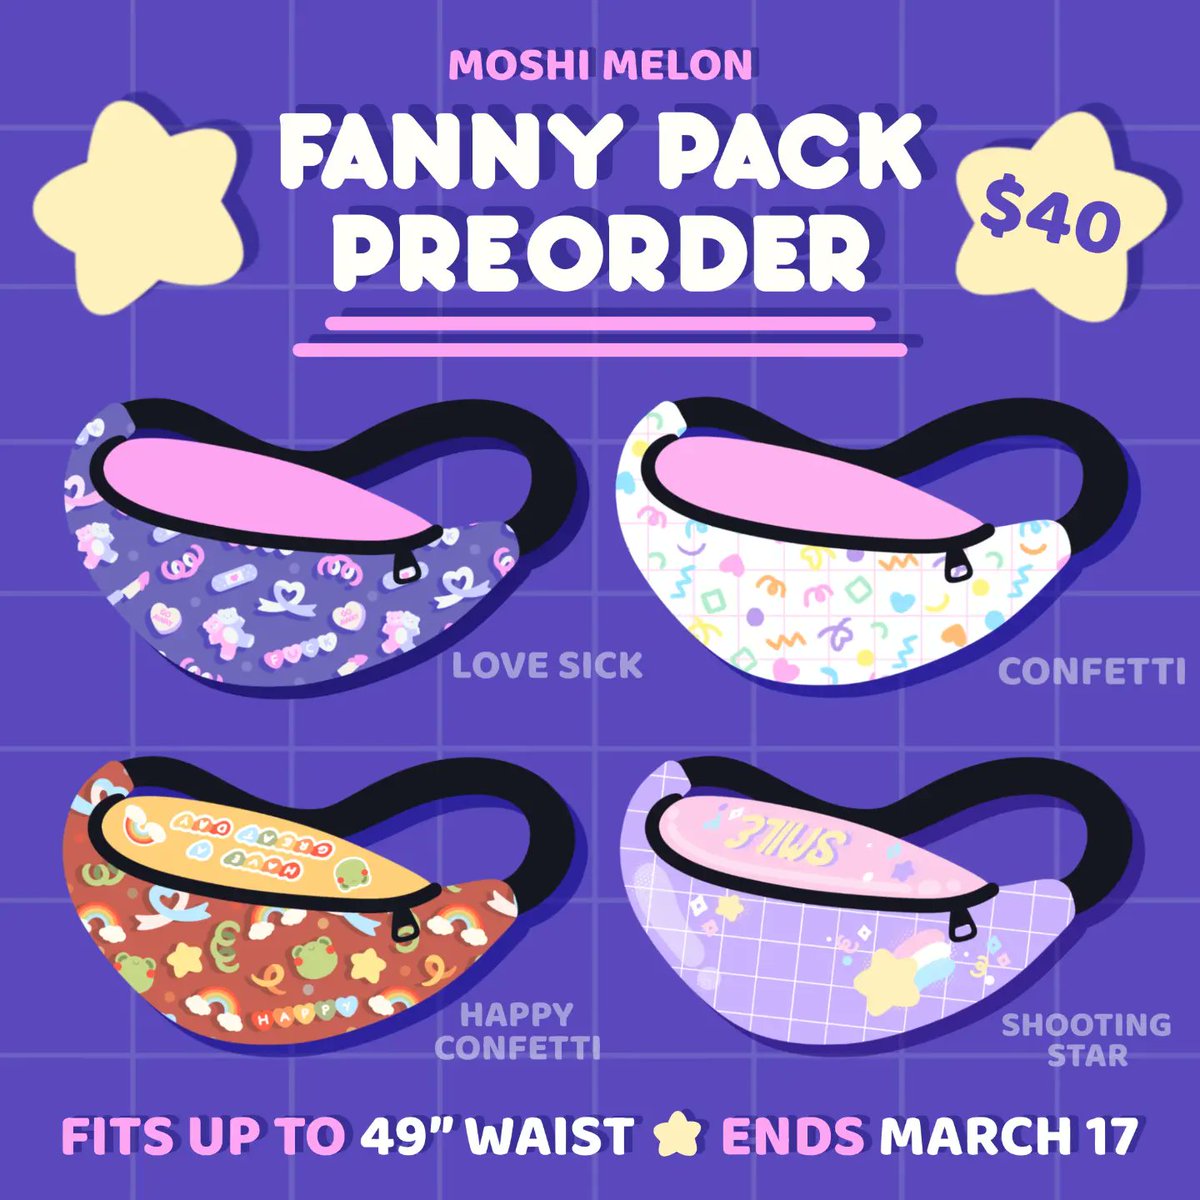 ✨️Fanny Packs Preorder Now Open✨️
❤️ fits up to 49' waist/hips 
🧡 adjustable strap w/buckle
💛 easy to clean fabric
💚 open till 3/17 @ 11:59PM EST
💙 estimated shipping mid May

moshimelon.com/product-catego…

#fairykei #jfashion #fannypacks #mehera #pastelaesthetic